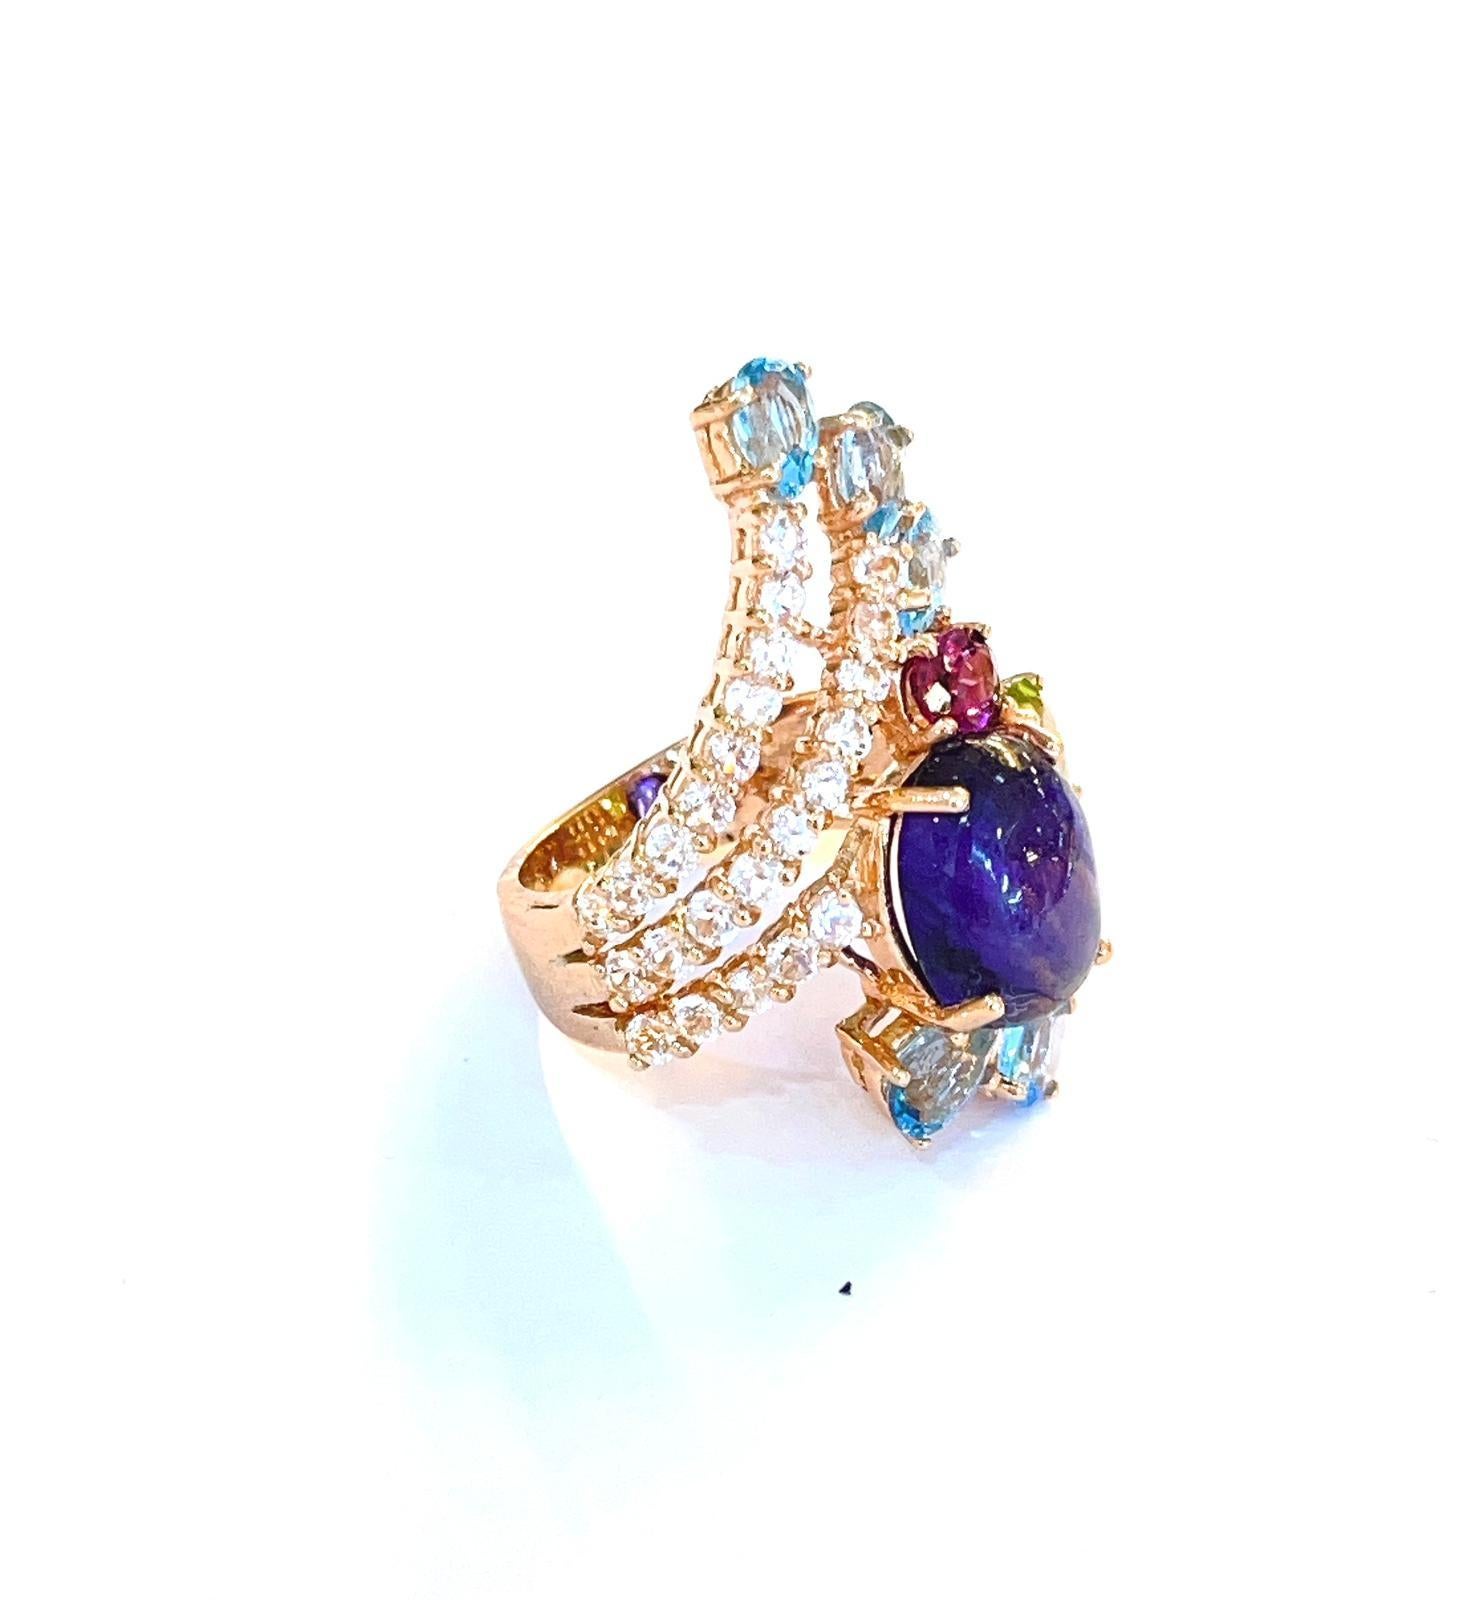 Bochic “Capri” Blue Sapphire & Multi Gem Cocktail Ring Set in 18k Gold & Silver In New Condition For Sale In New York, NY